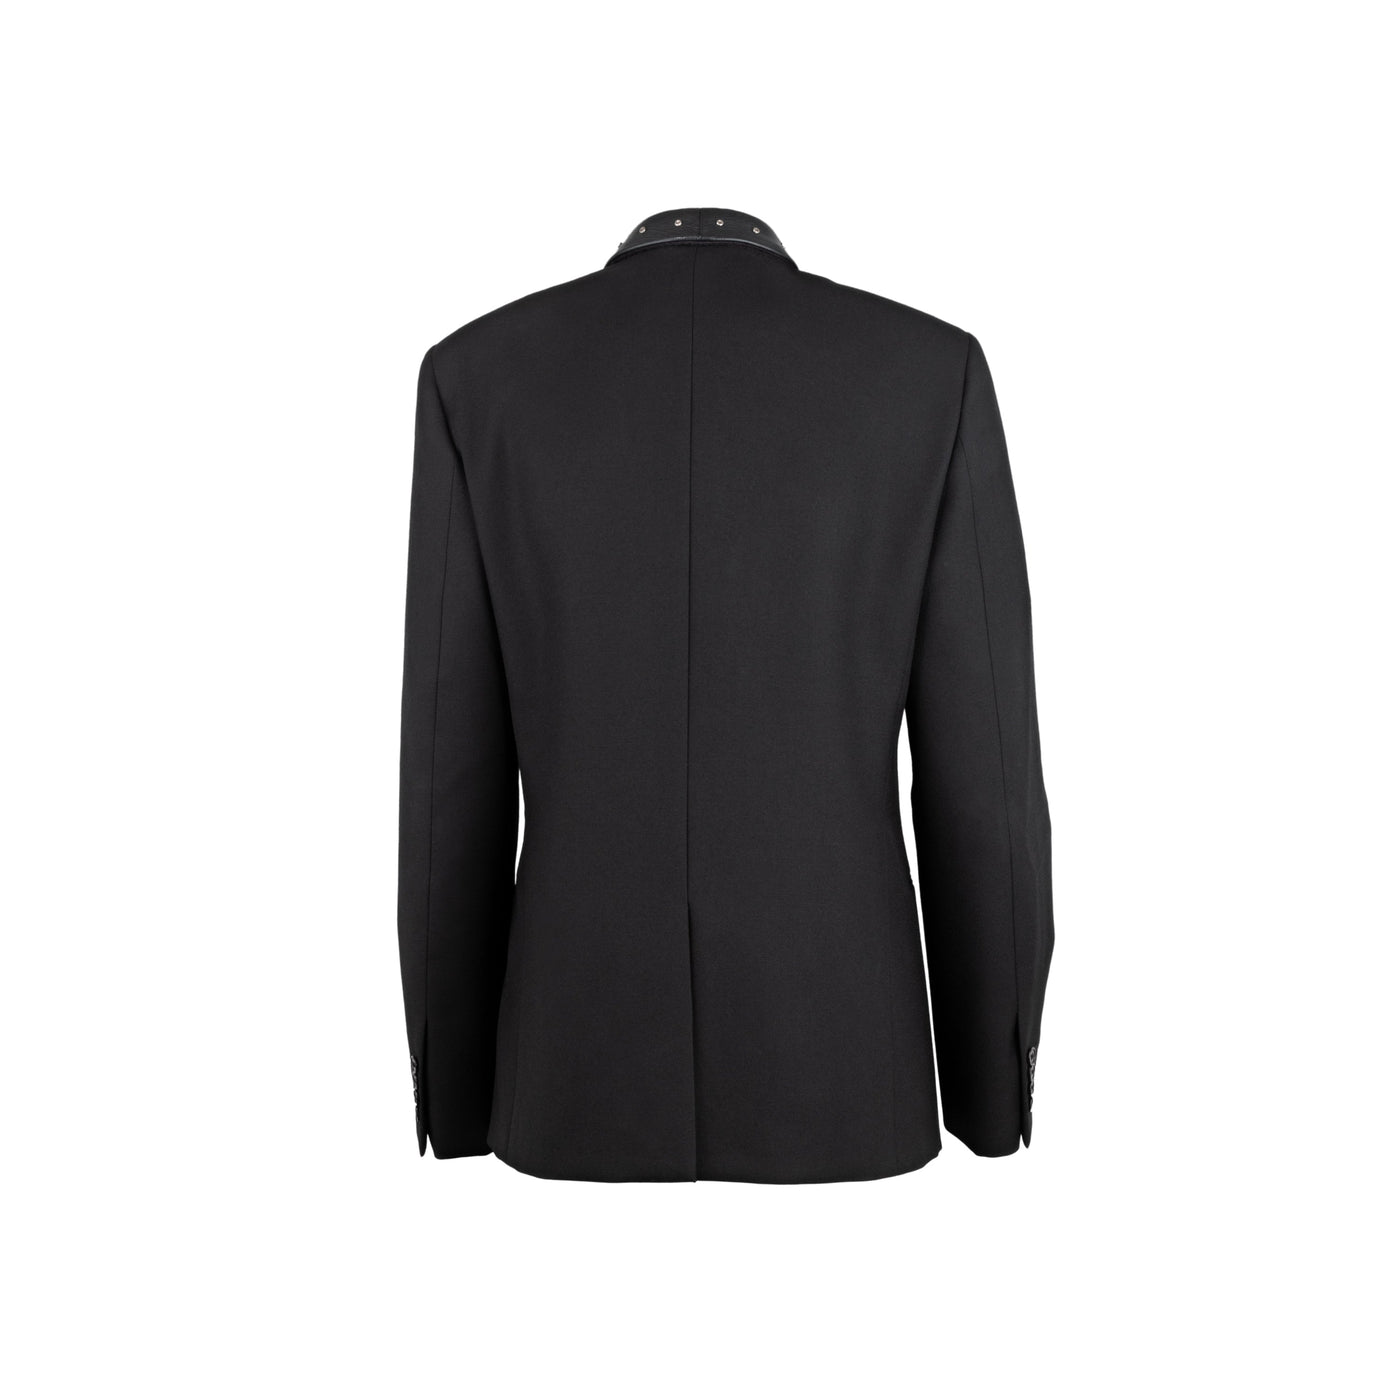 Yves Saint Laurent black wool blazer jacket. Featuring leather lapels, decorated with studs, long sleeves, a single button fastening, front pockets and a back vent pre-owned